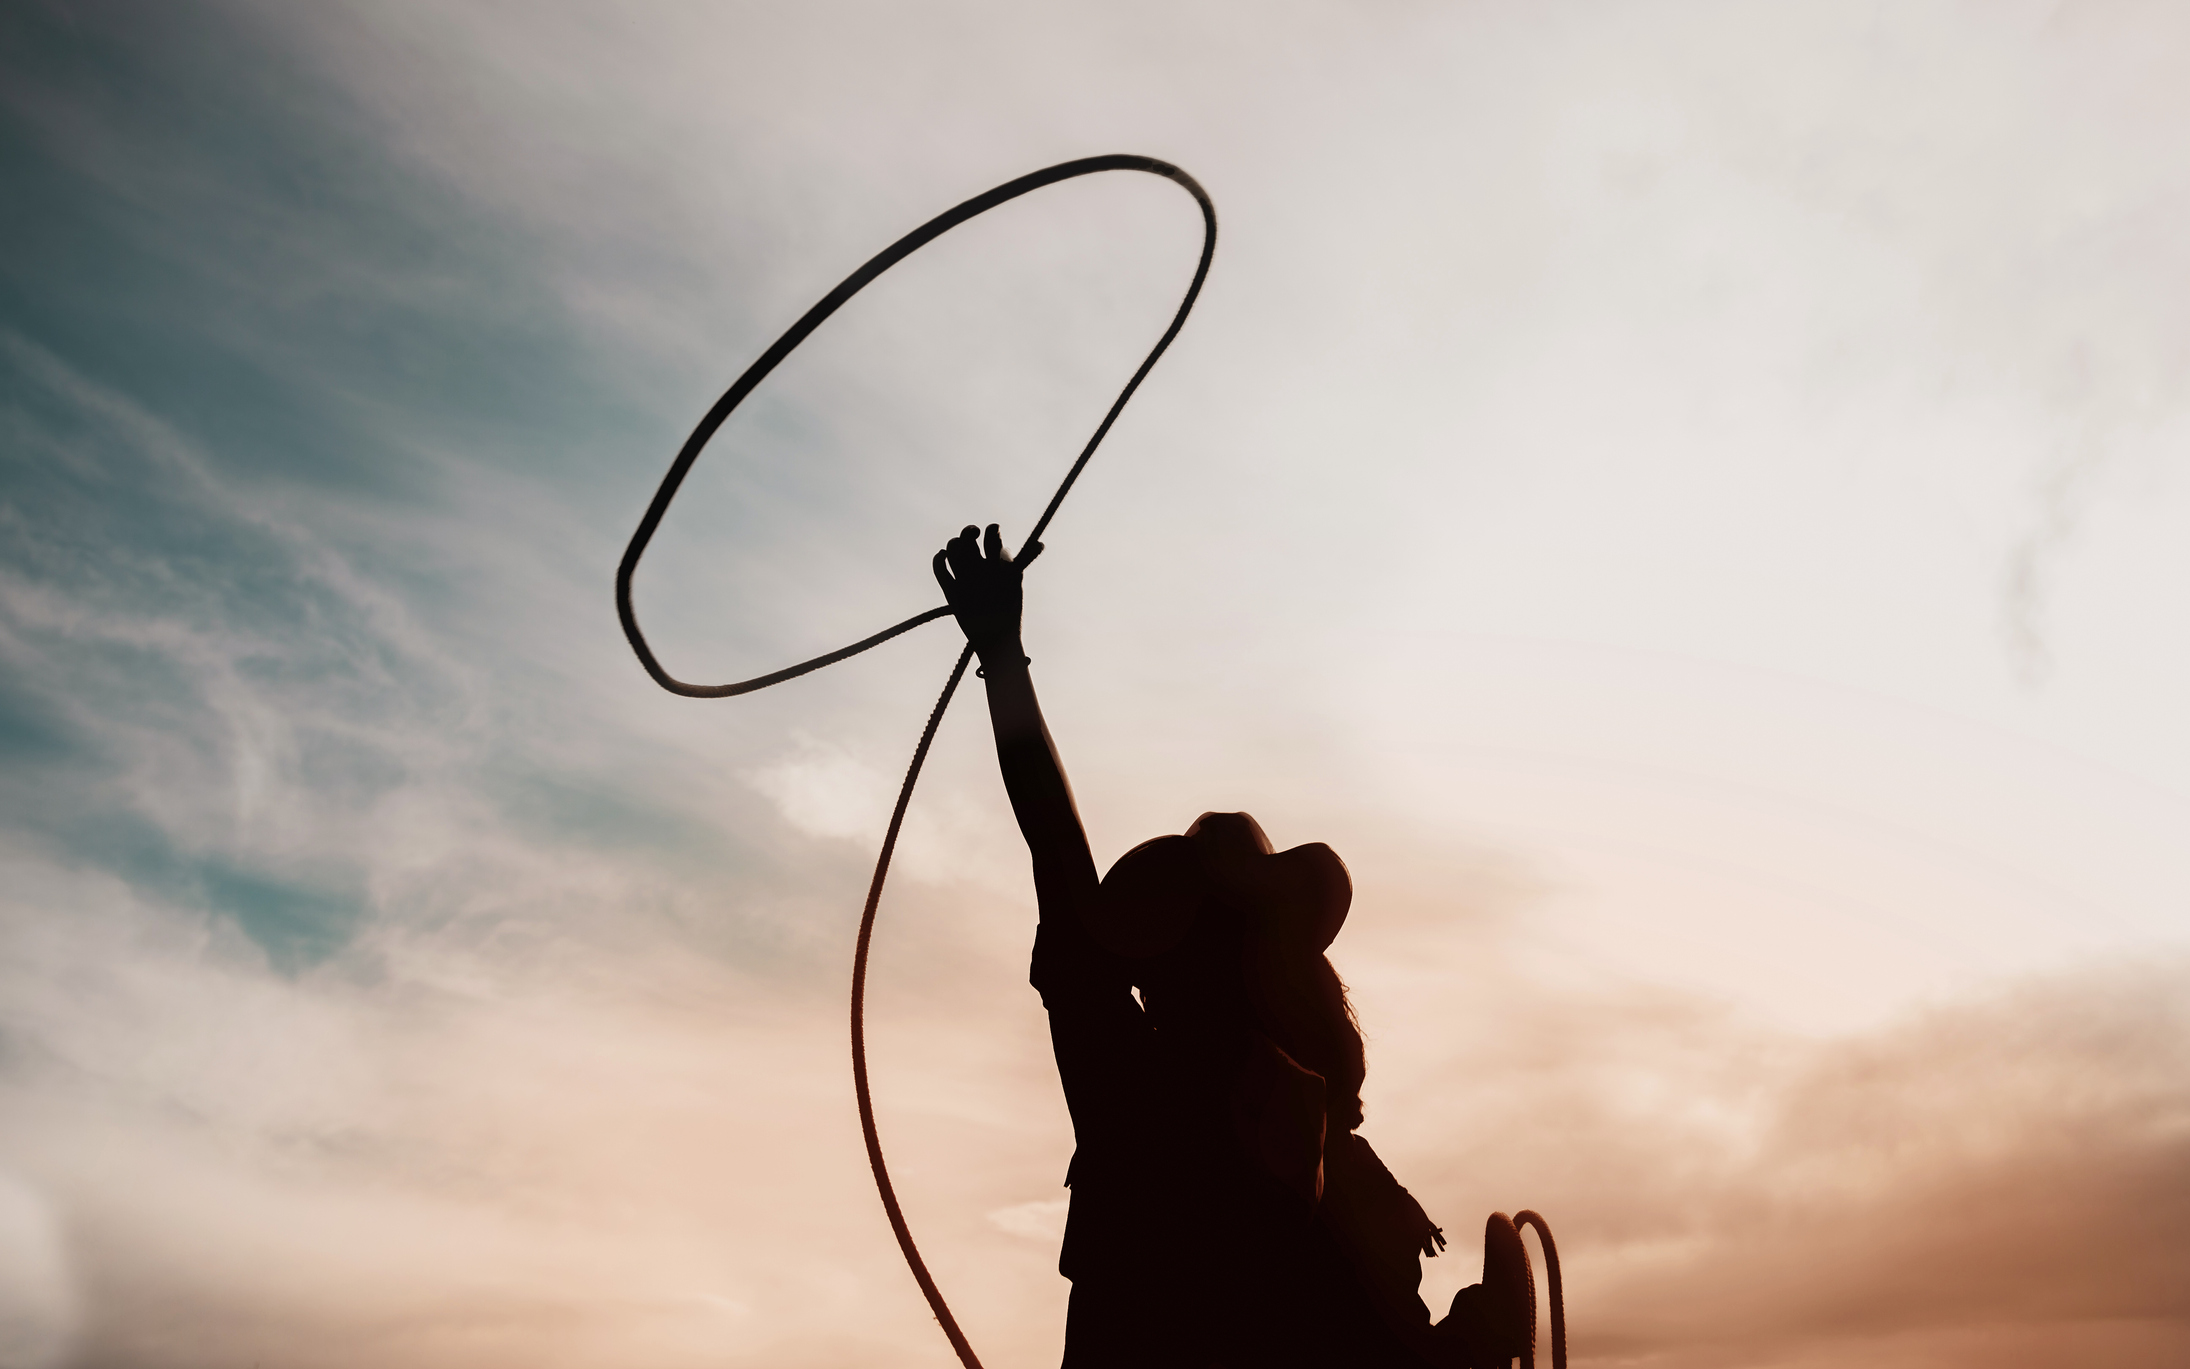 cowgirl throwing a lasso